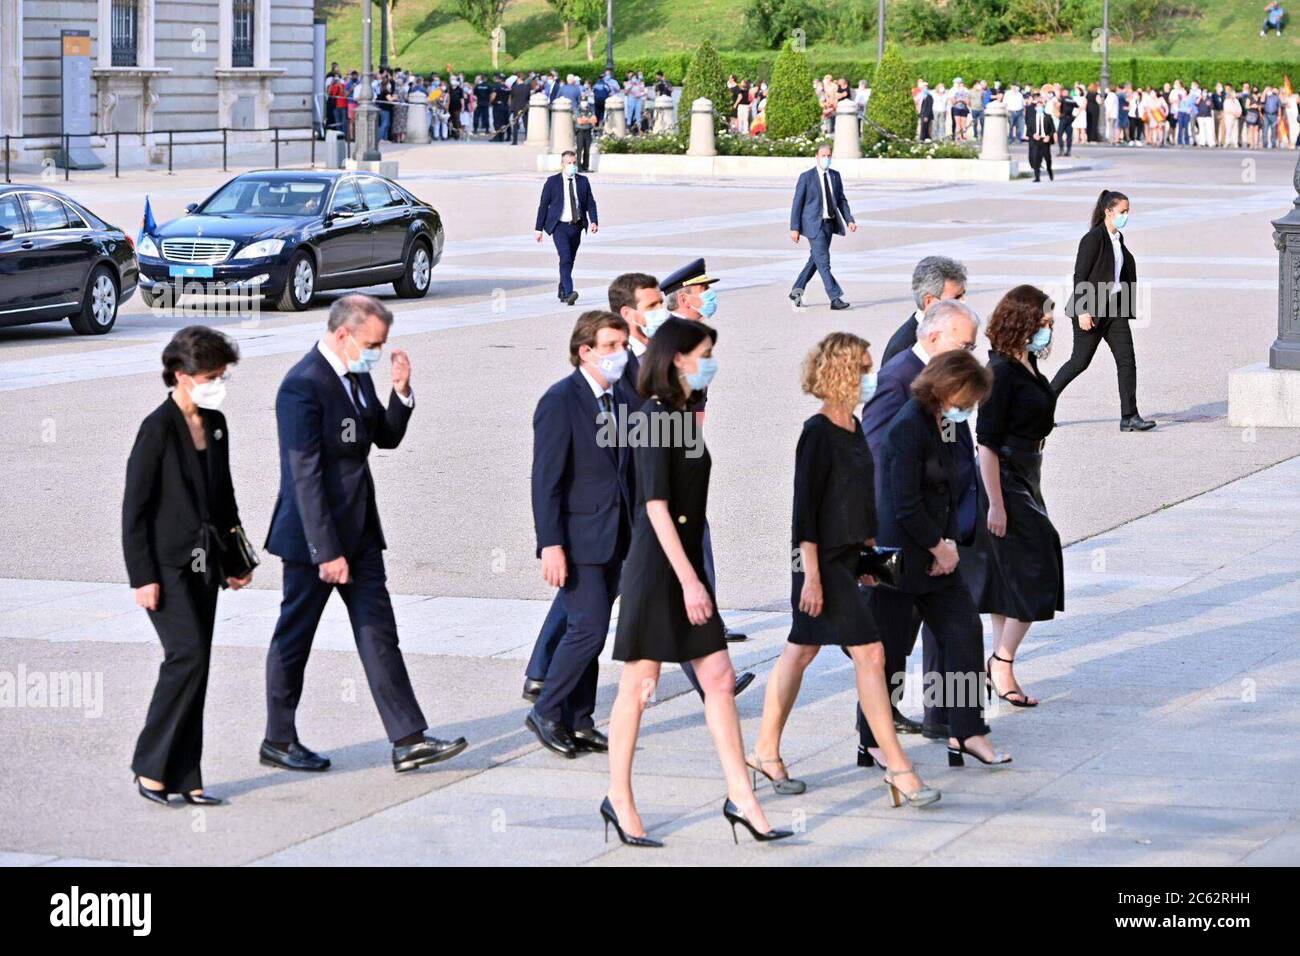 Madrid, Spain. 06th July, 2020. Juan José Gonzalez Rivas with Meritxell Batet, Carmen Calvo, Isabel Diaz Ayuso, Jose Luis Martinez Almeida and Pablo Casado during the state funeral for the victims of the Covid 19 pandemic in Madrid on Monday, July 6, 2020. Credit: CORDON PRESS/Alamy Live News Stock Photo